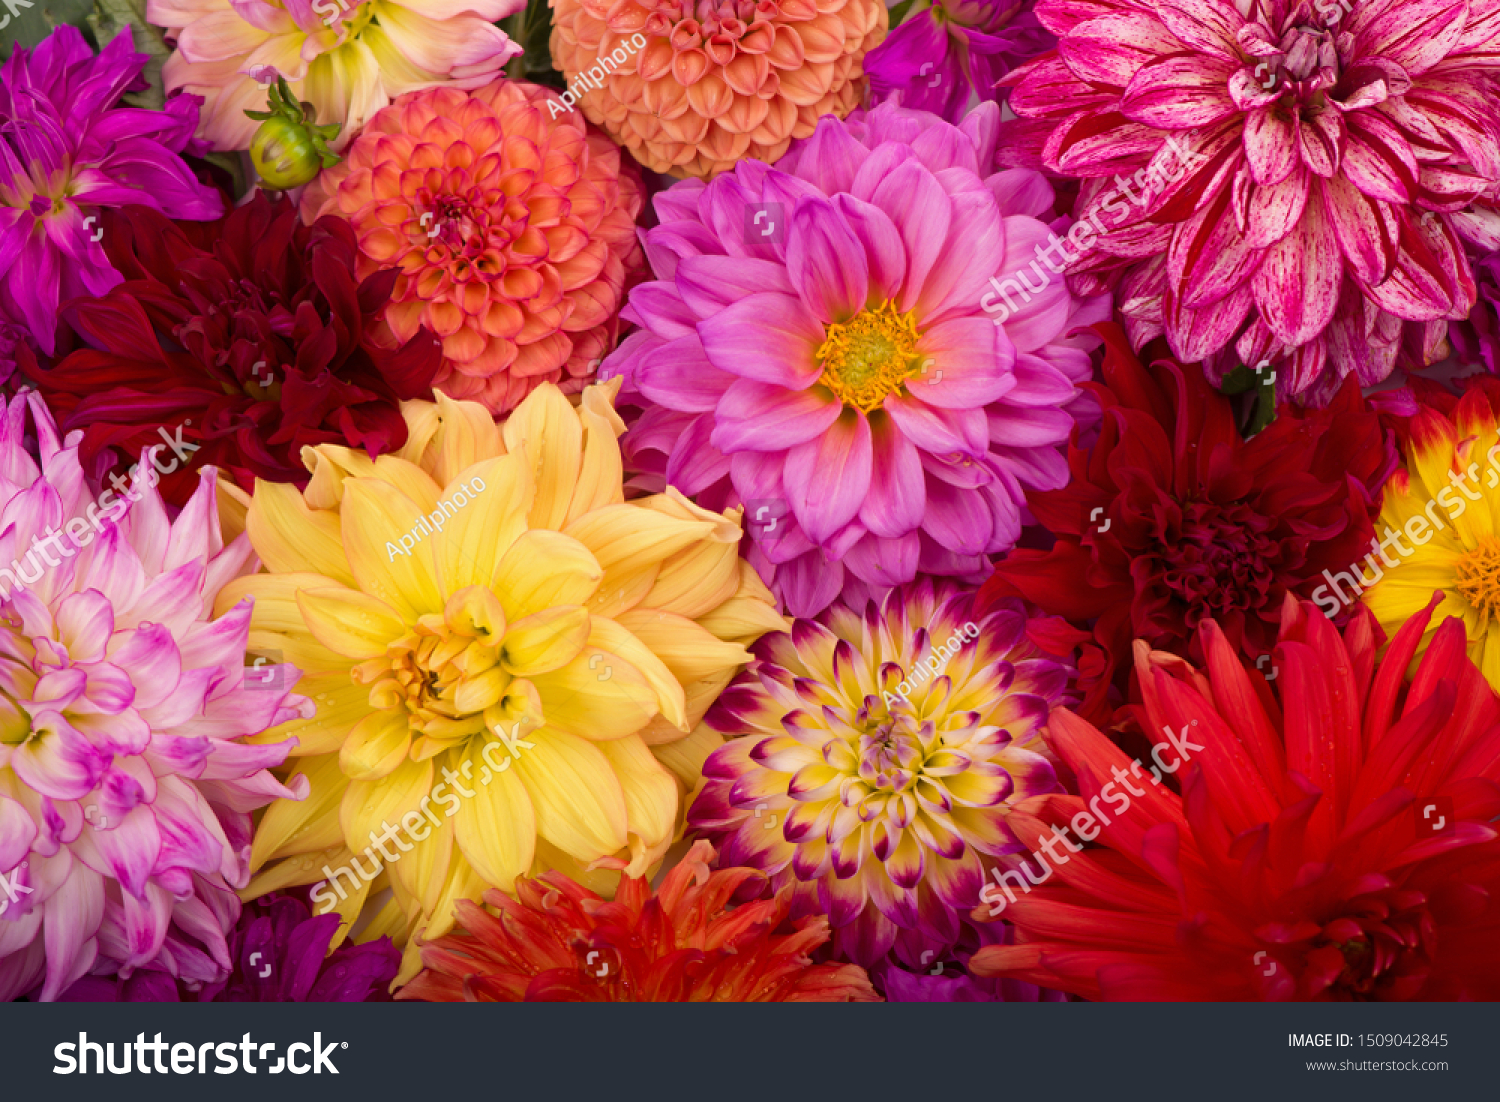 Red, white, yellow dahlia august colorful background. View of multicolor dahlia flowers. Beautiful dahlia flowers on green background. Summer flowers is genus of plants in sunflower family Asteracea #1509042845